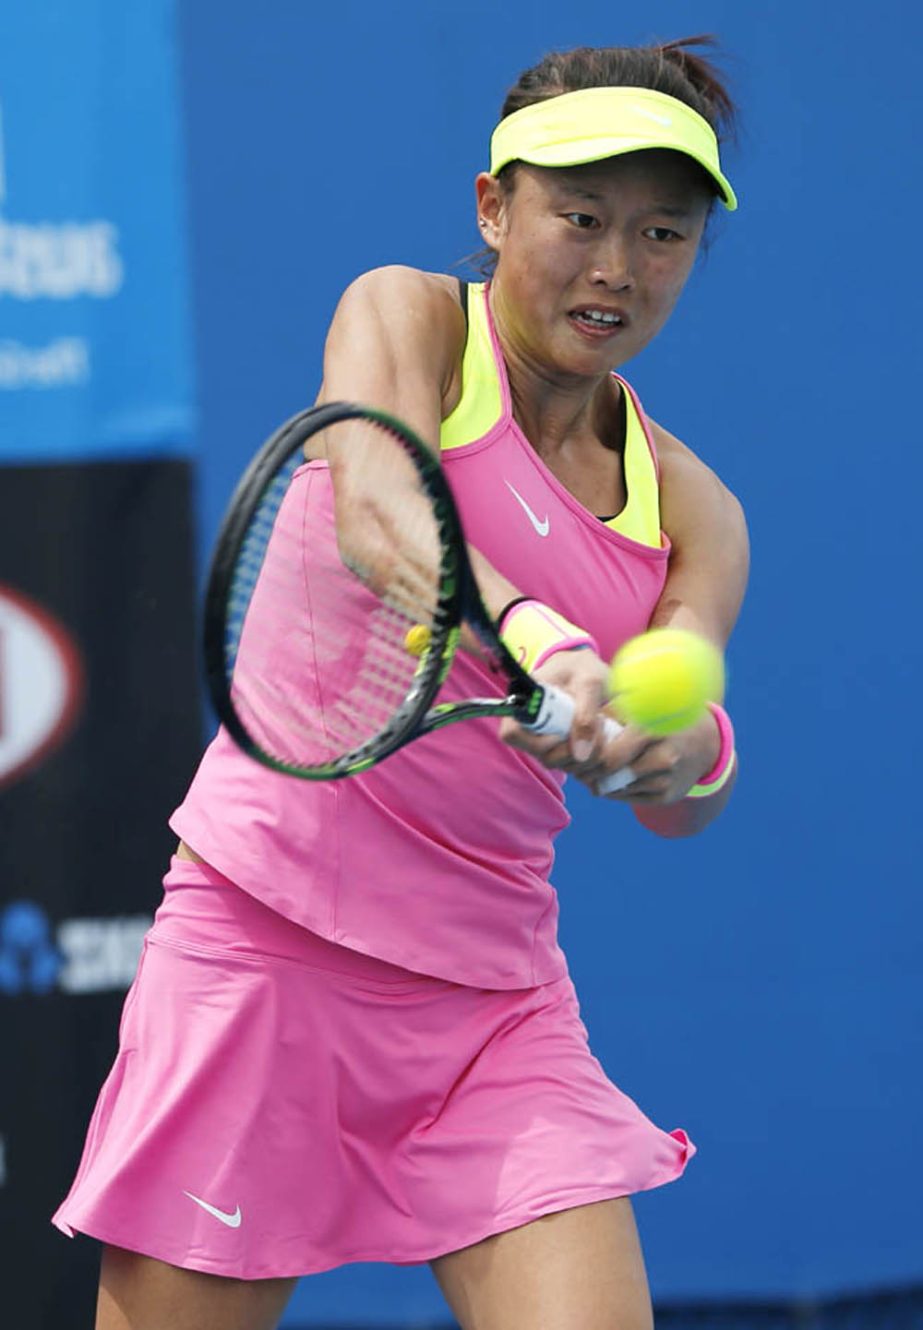 Taiwanâ€™s Chang Kai-Chen makes a backhand return to Chinaâ€™s Zheng Jie during their first round match at the Australian Open tennis championship in Melbourne, Australia on Tuesday.